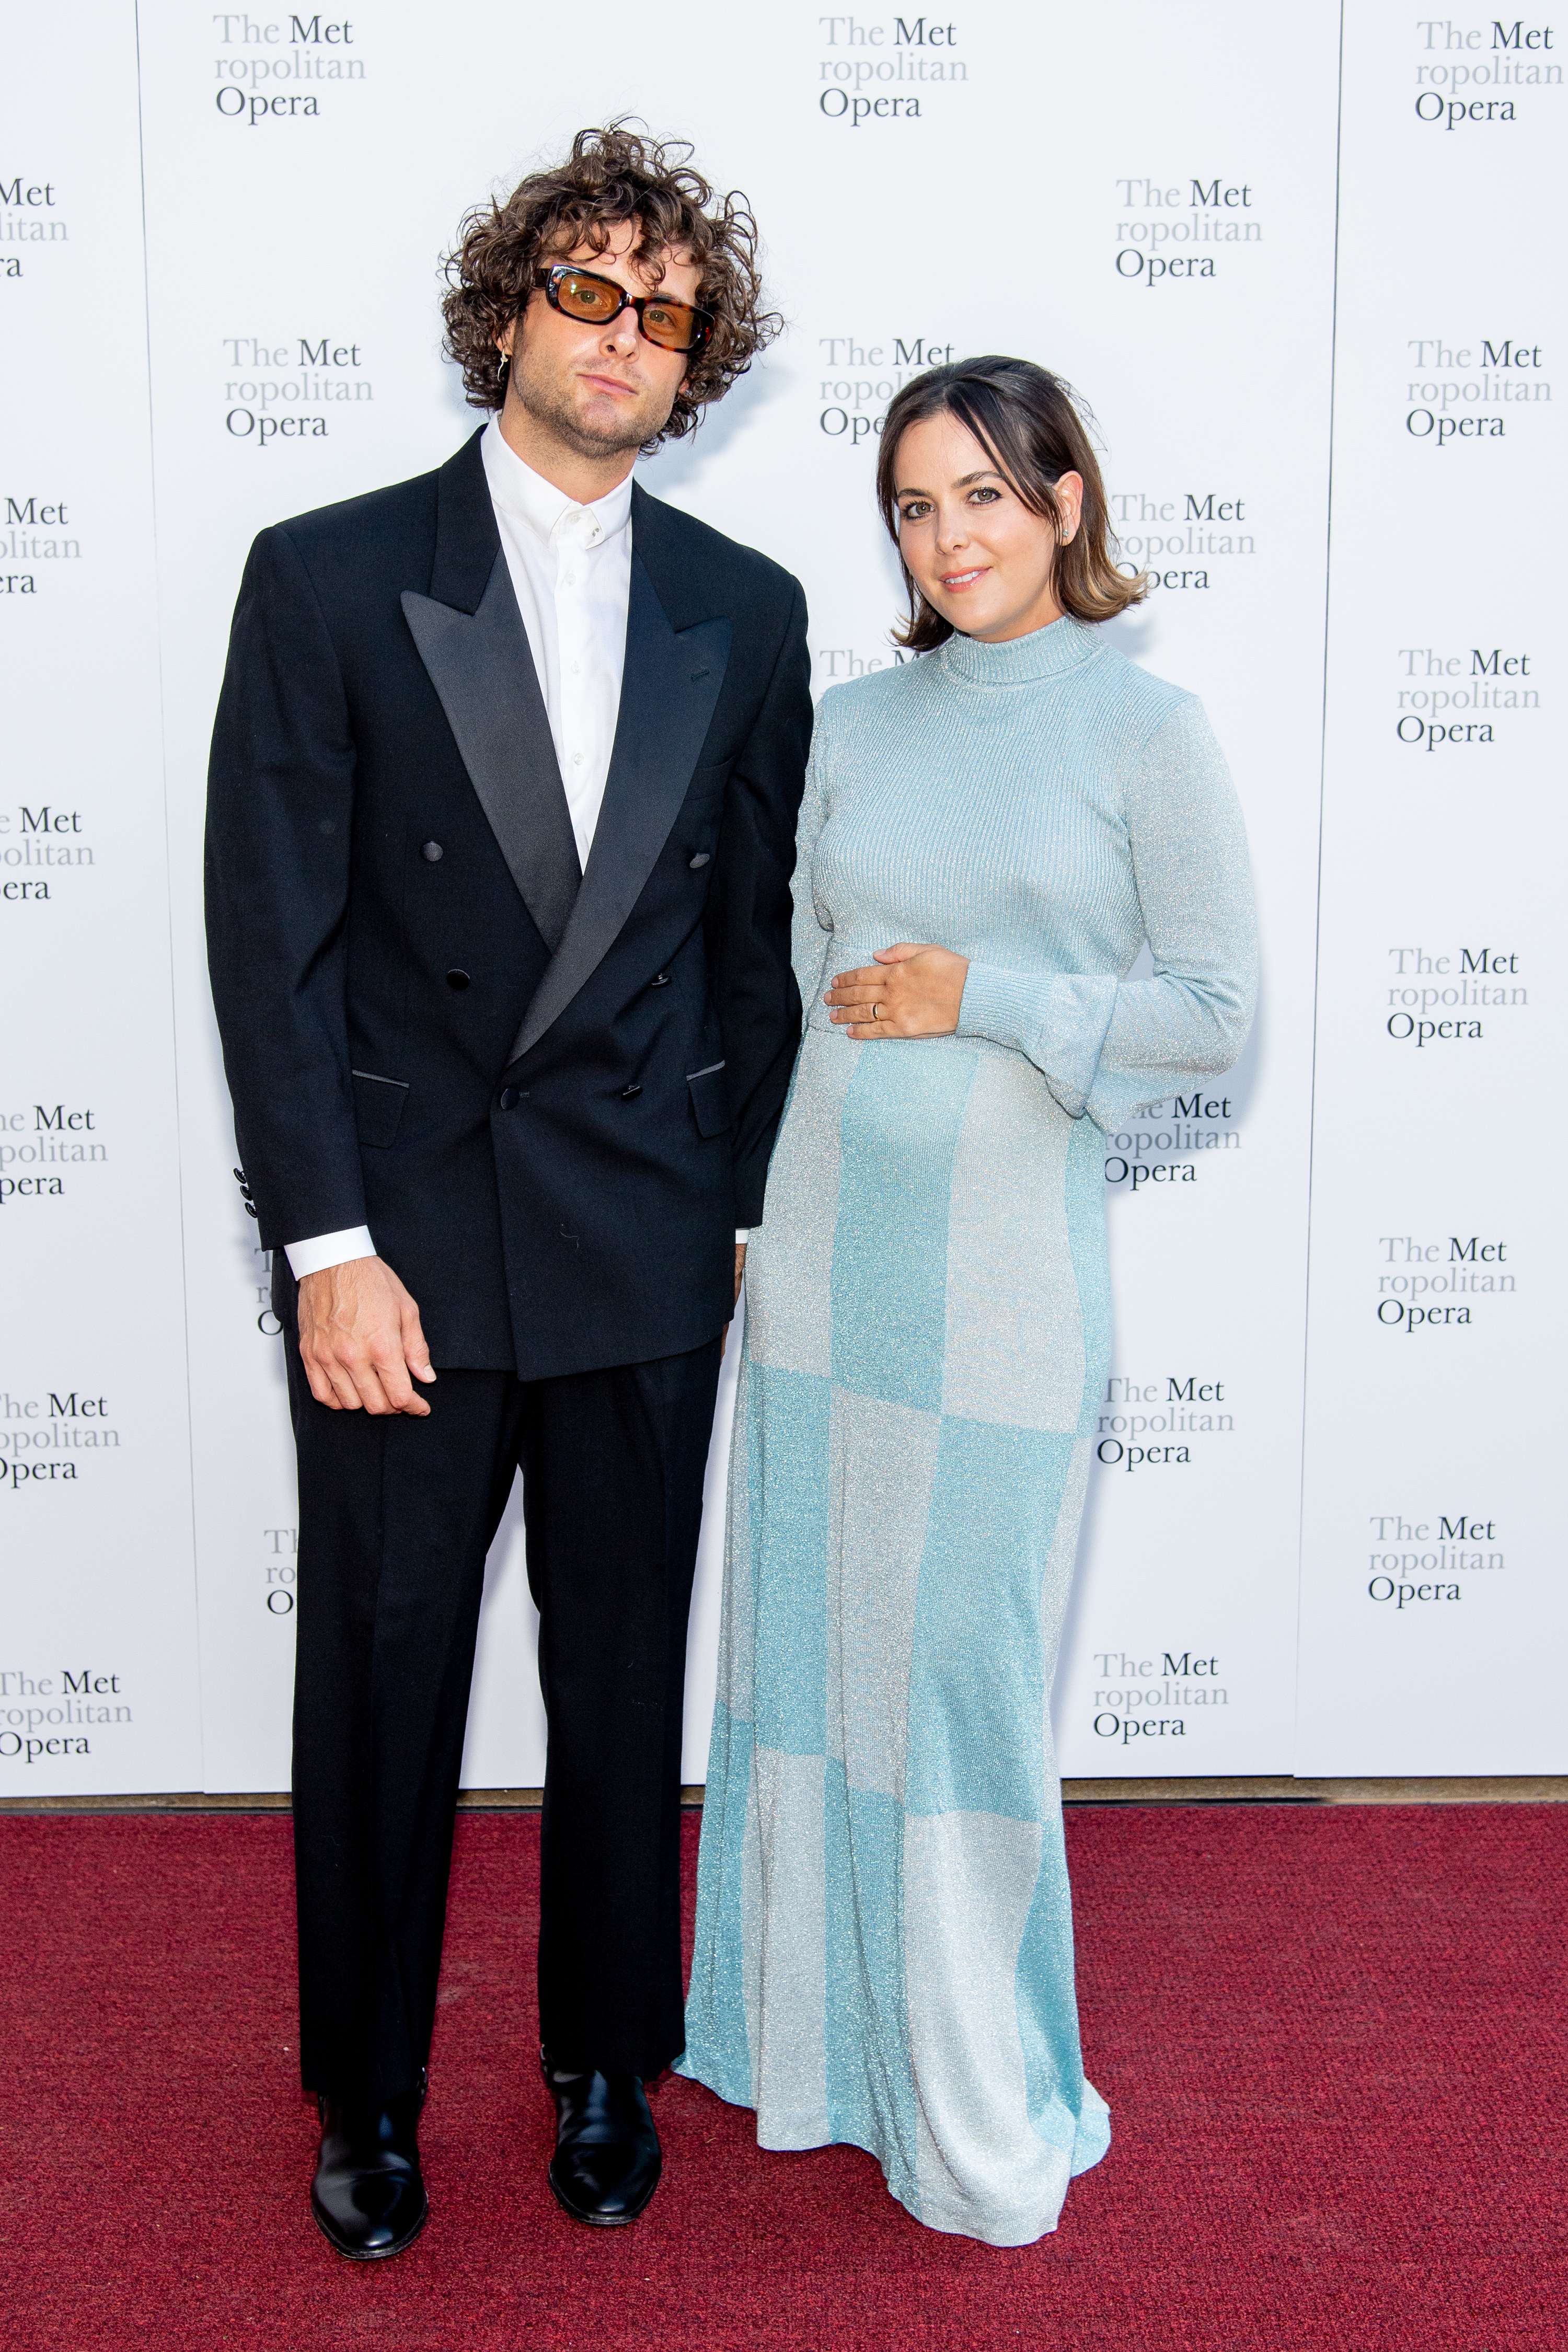 Nico Tortorella and Bethany Meyers attend the opening night of Medea at The Metropolitan Opera House